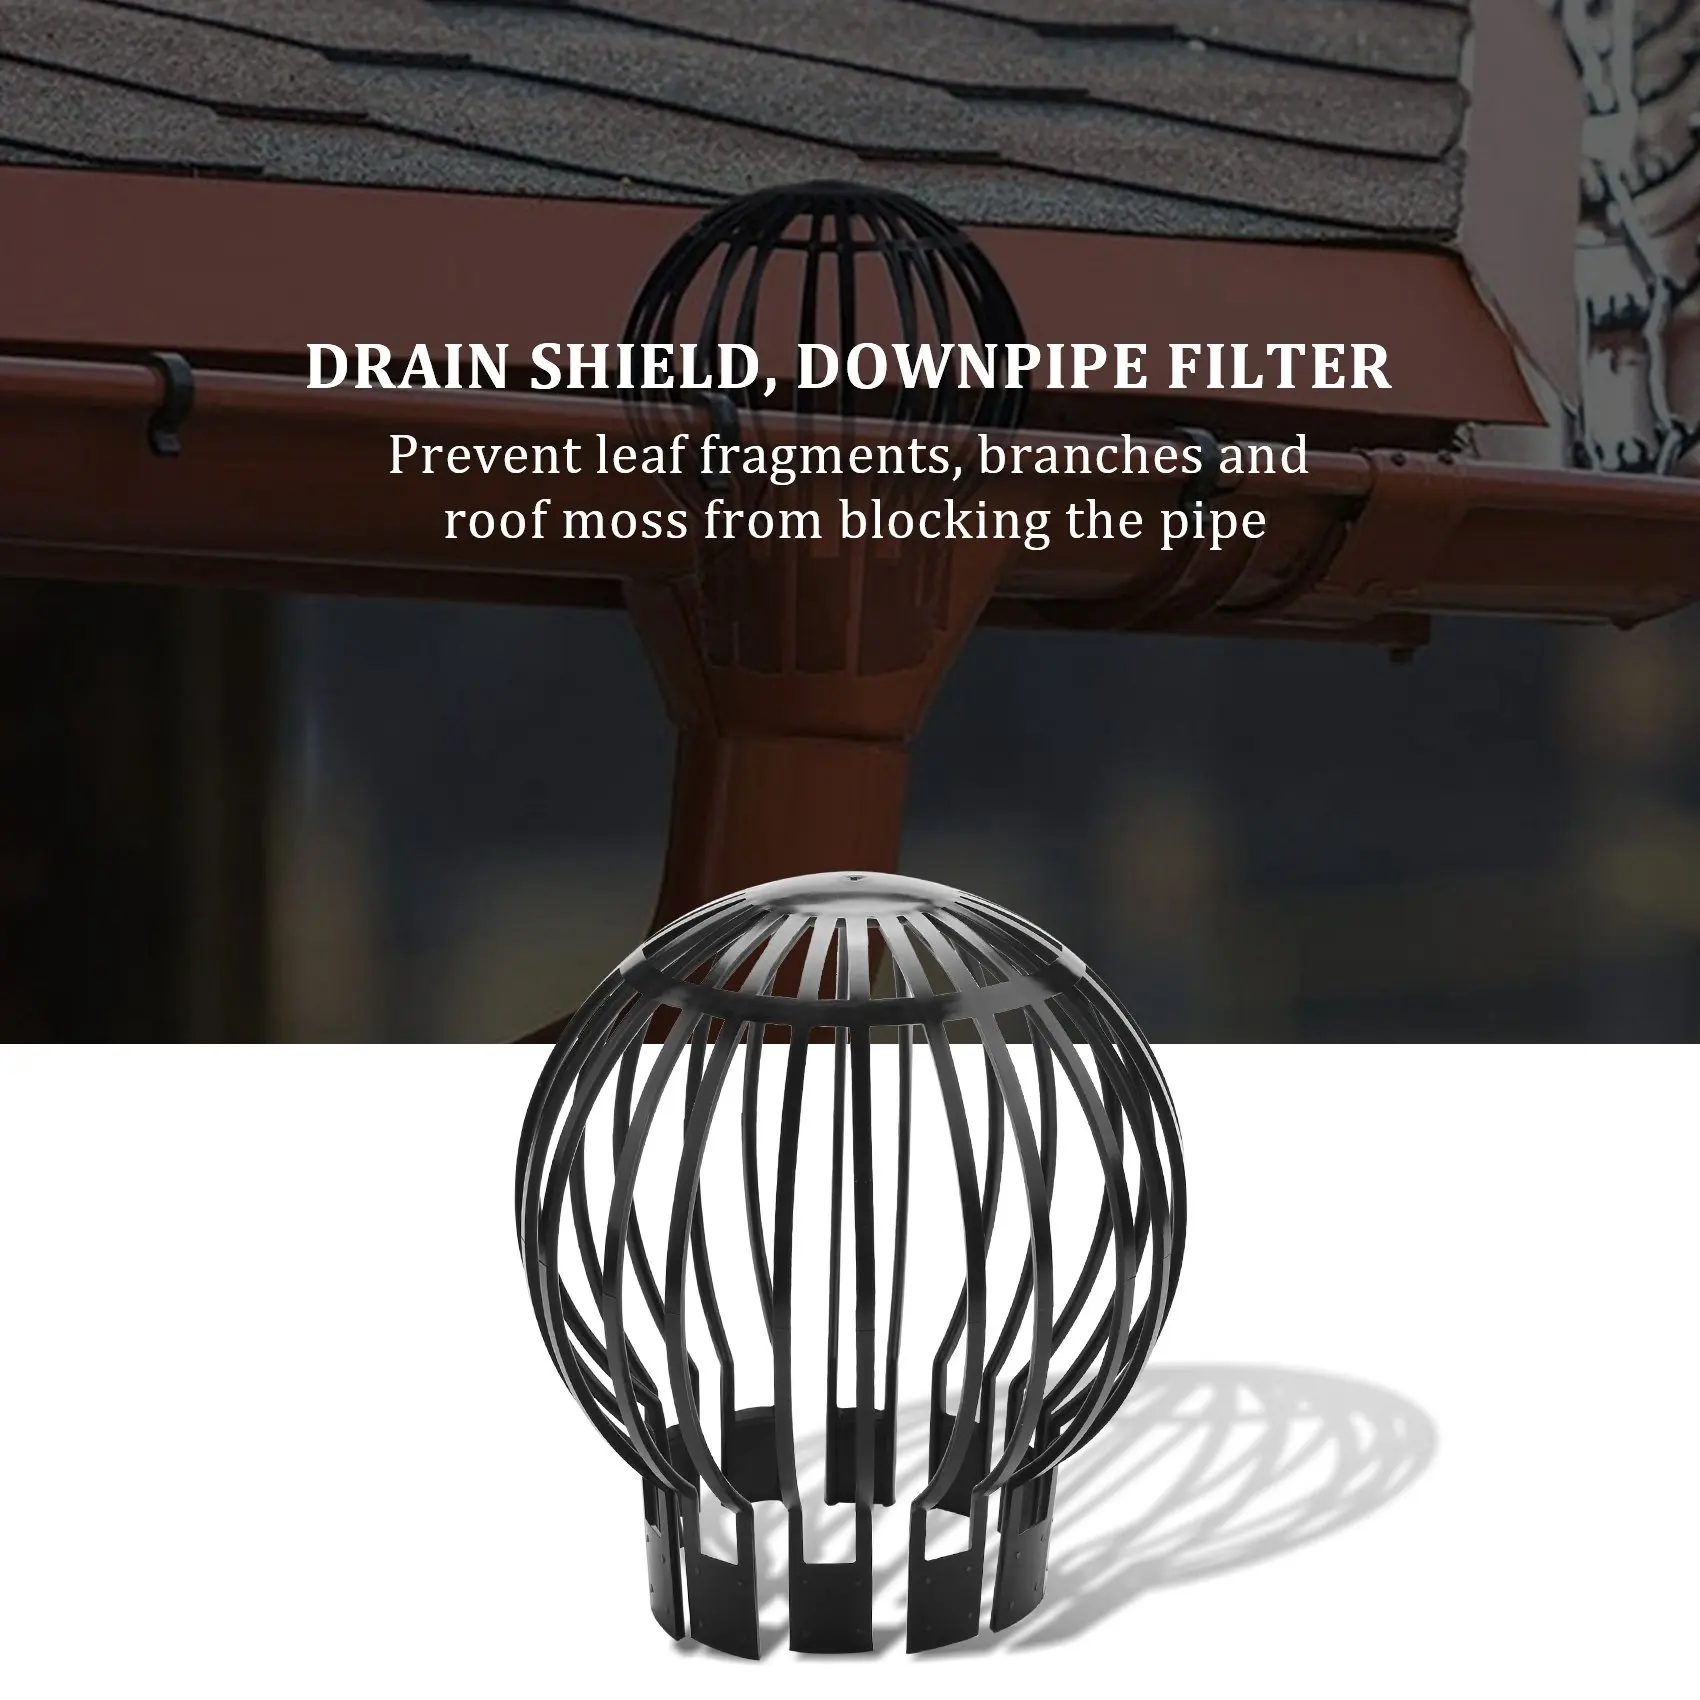 

4PCS Gutter Guard Downspouts Filter Strainer Preventing Leaf Debris Branches Roof Moss From Clogging the Pipes